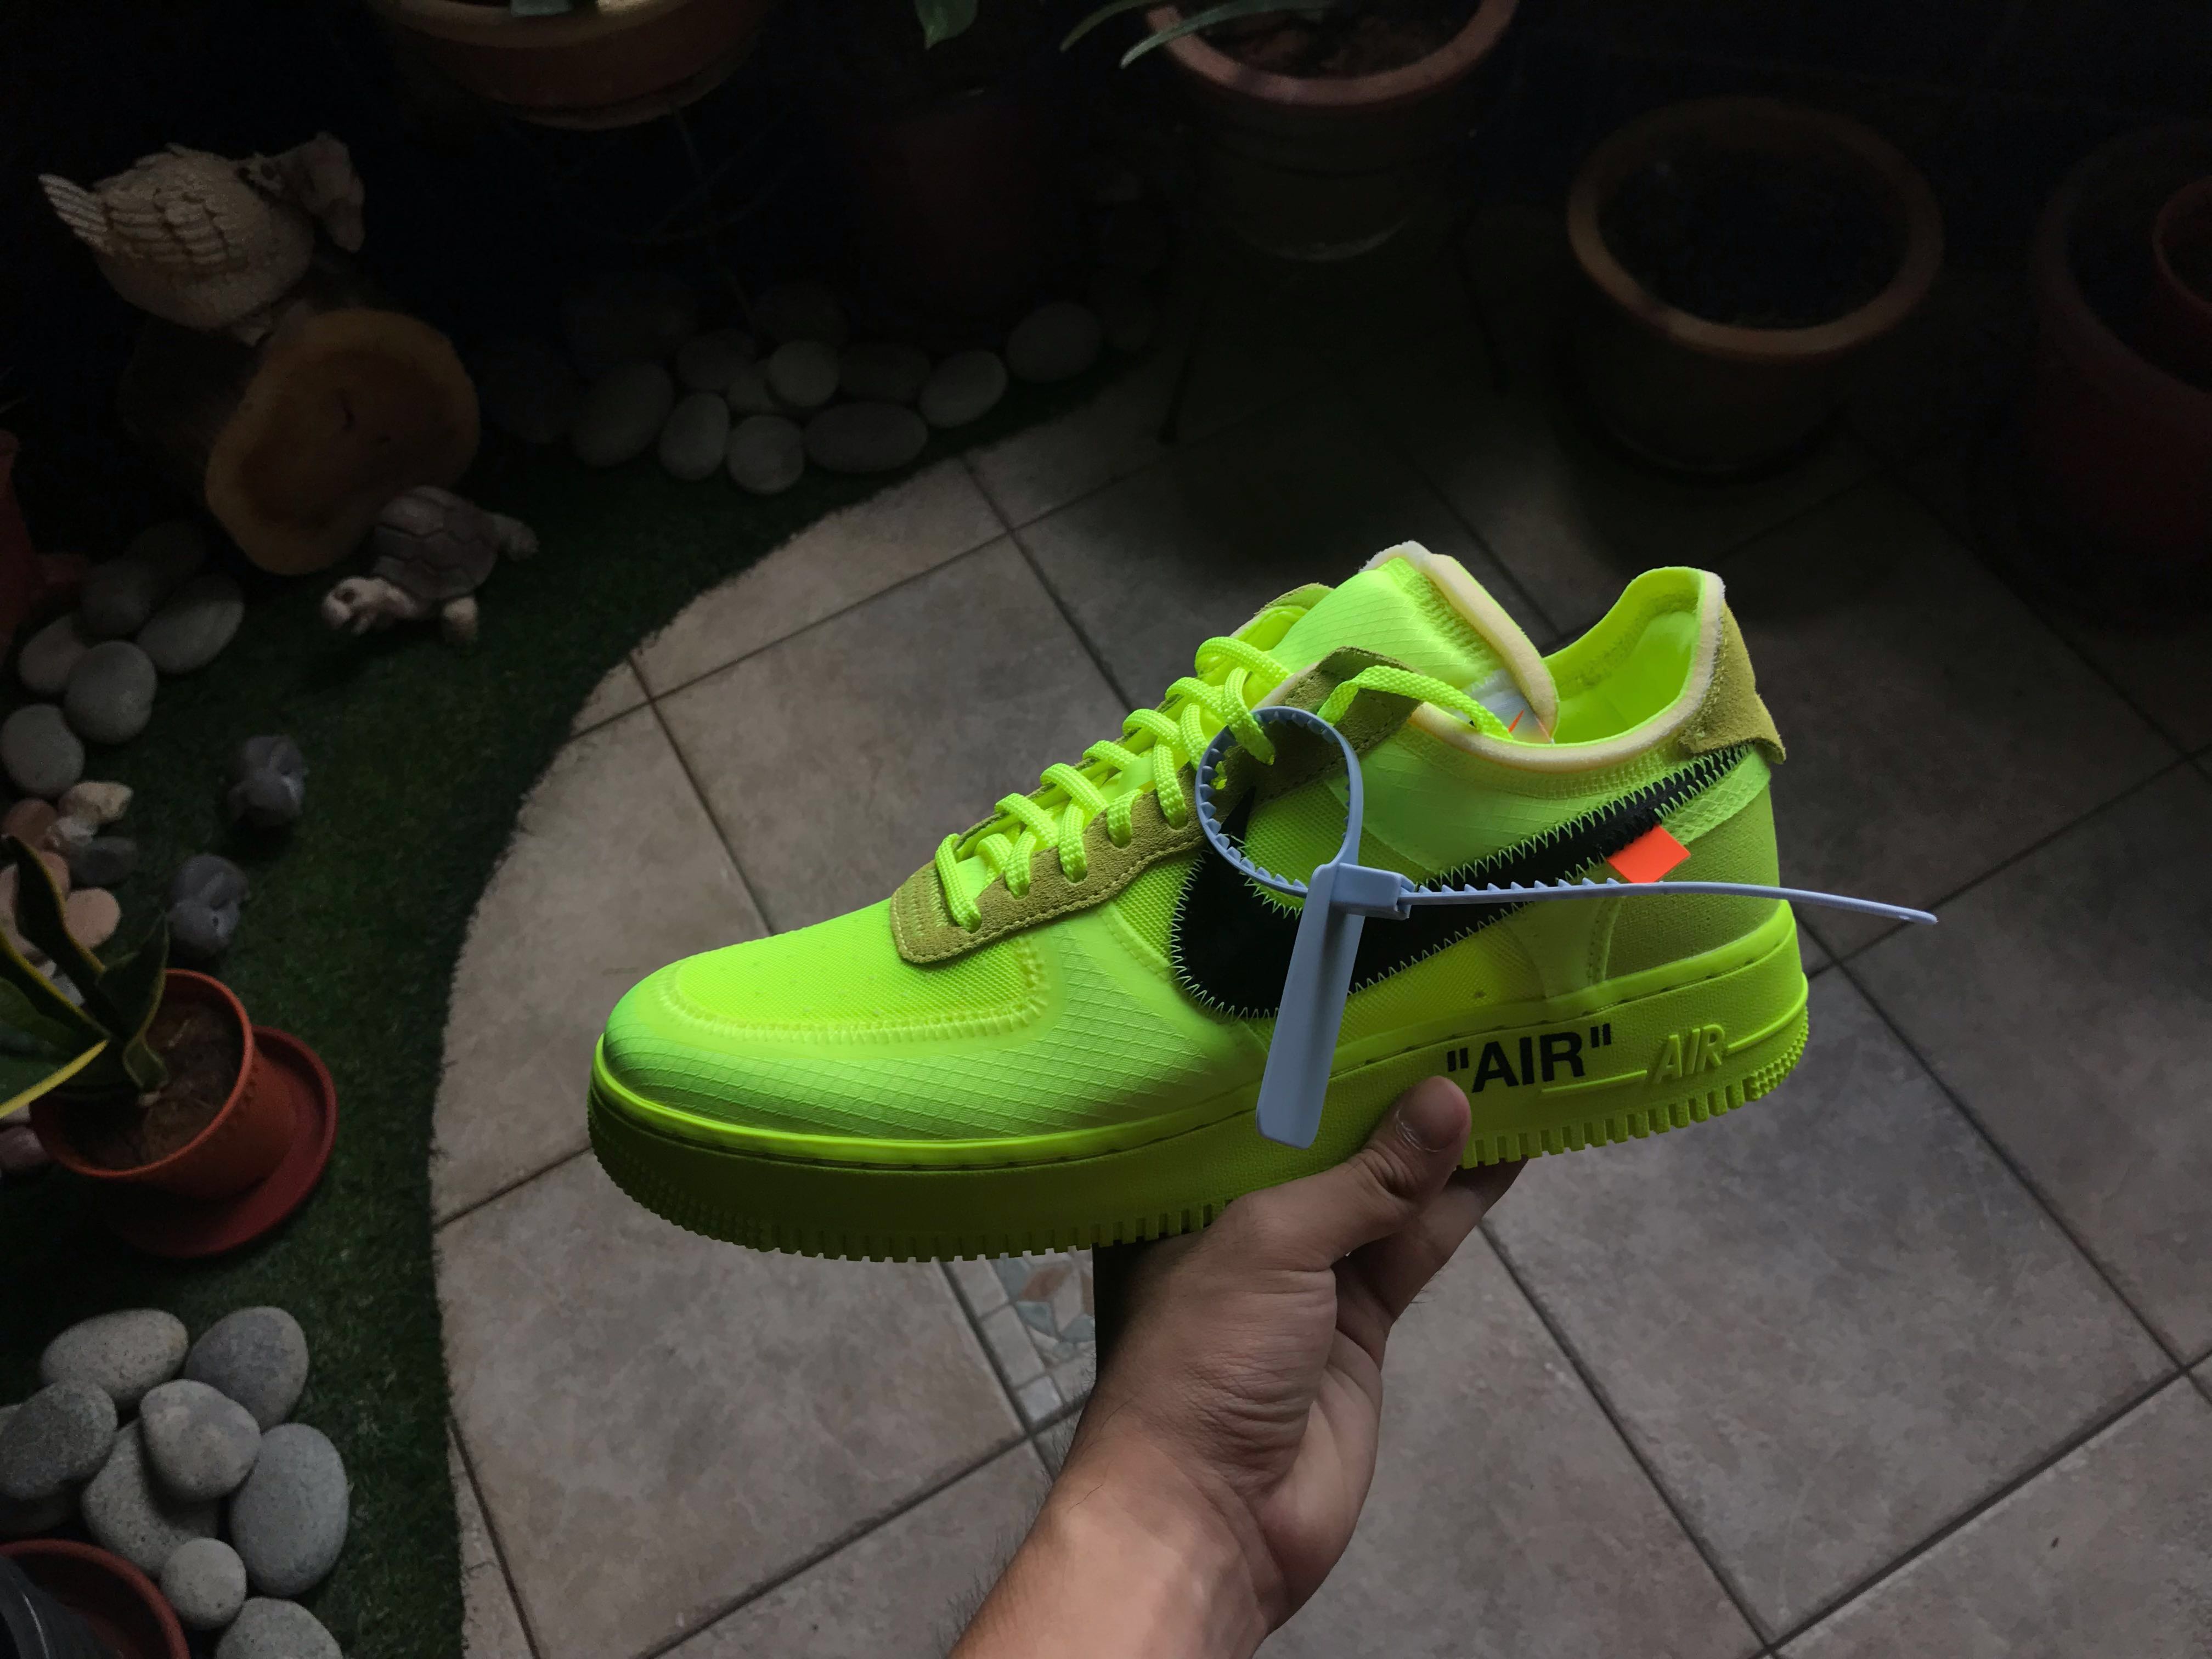 US10] Off white x Nike Air Force 1 Low 